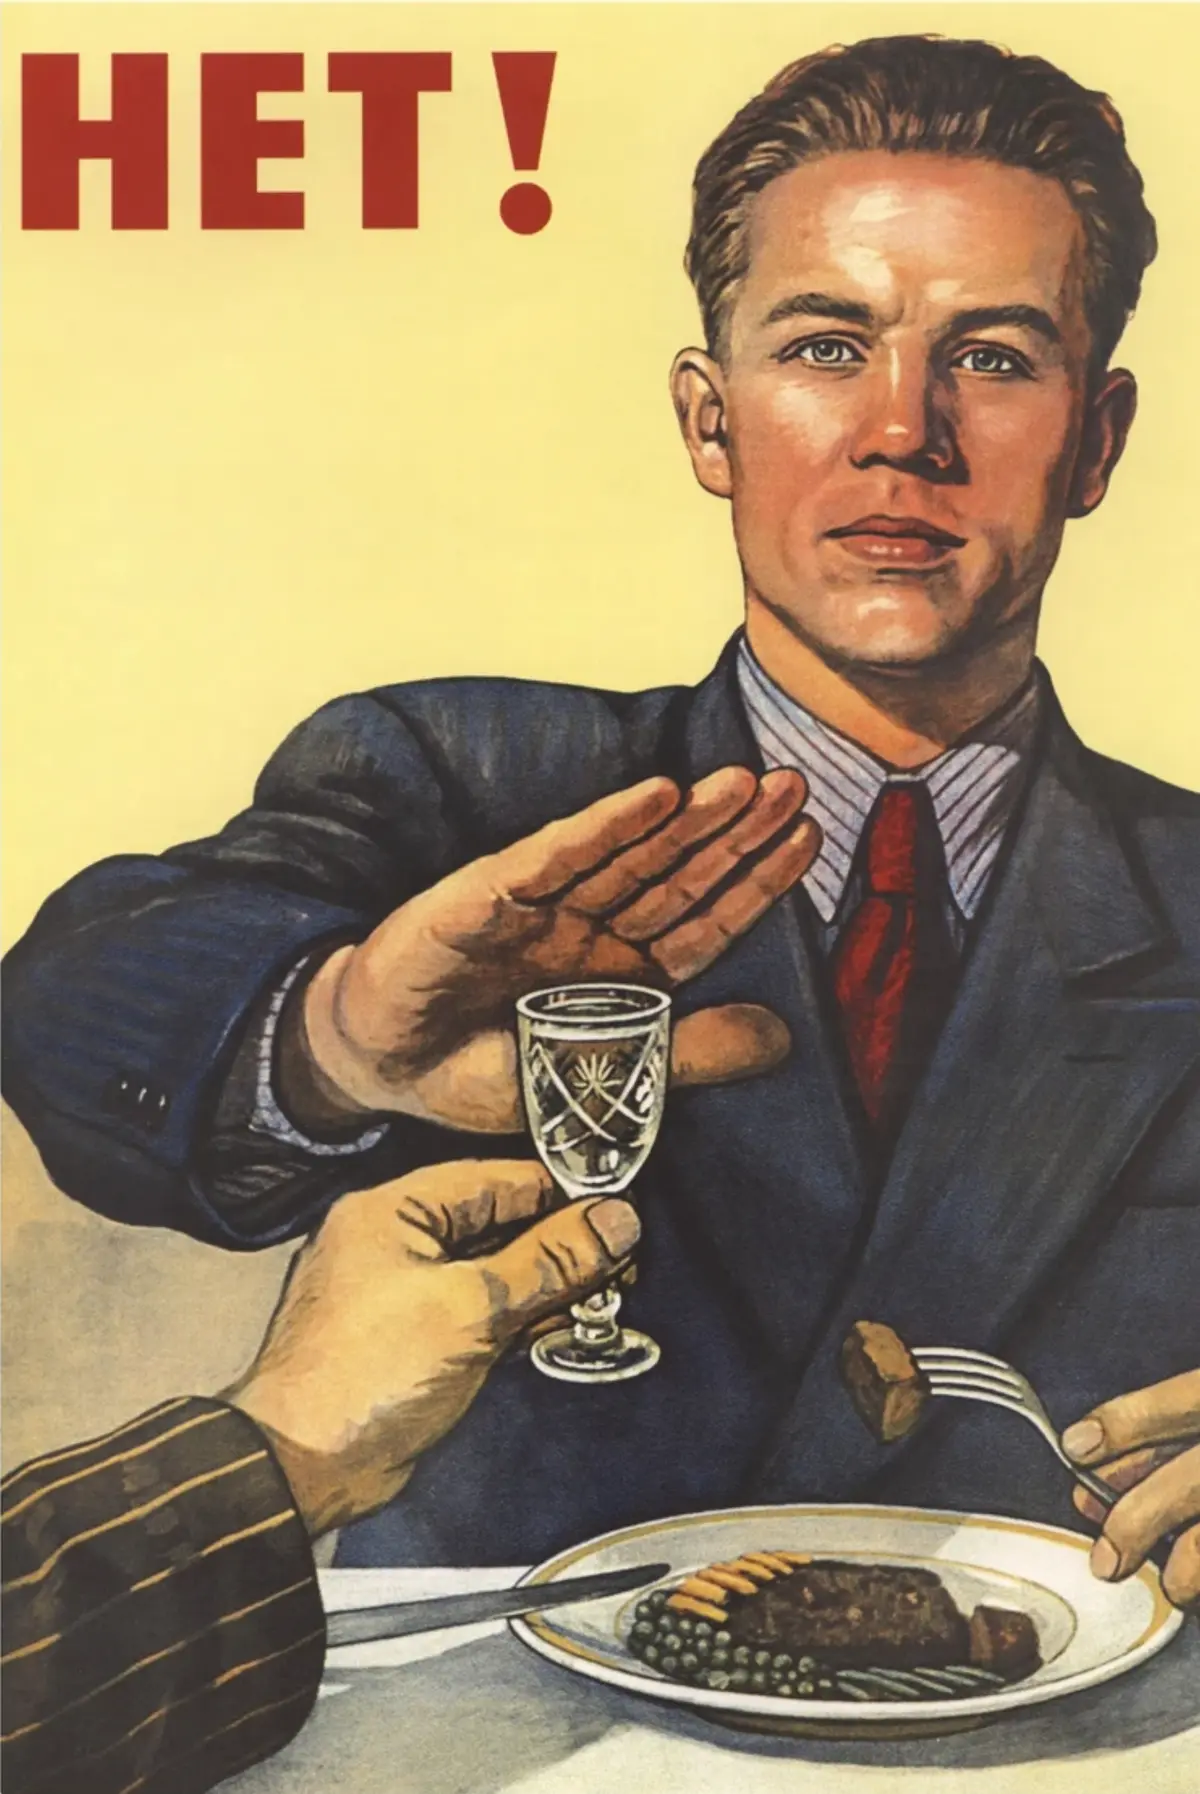 Soviet poster of a man refusing to drink alochol and drinking a mocktail